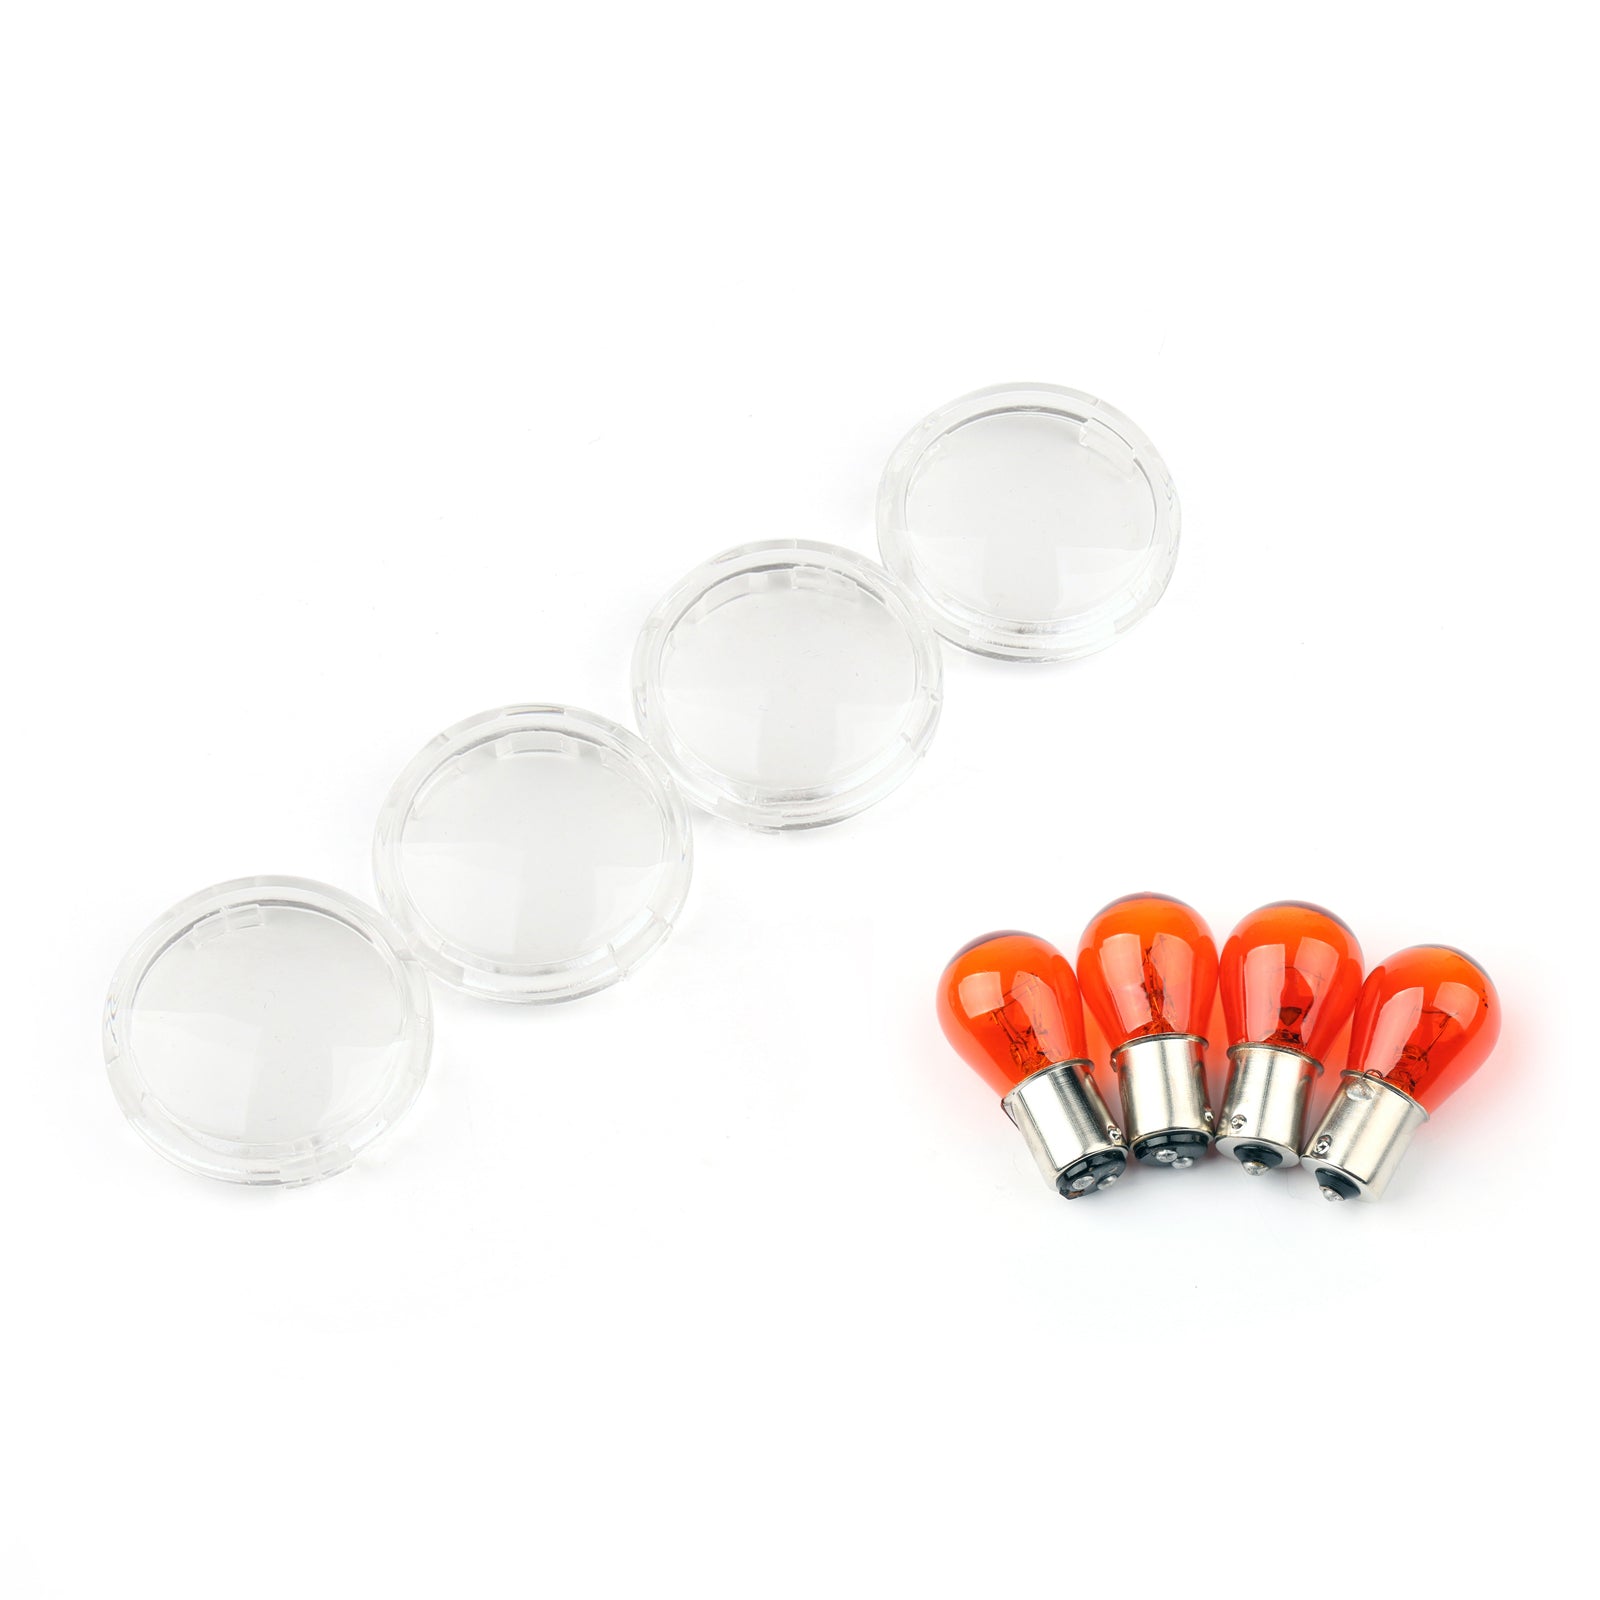 4x Turn Signal Lens Bulbs For Harley Softail Dyna Sportsters 22 &Up Orange